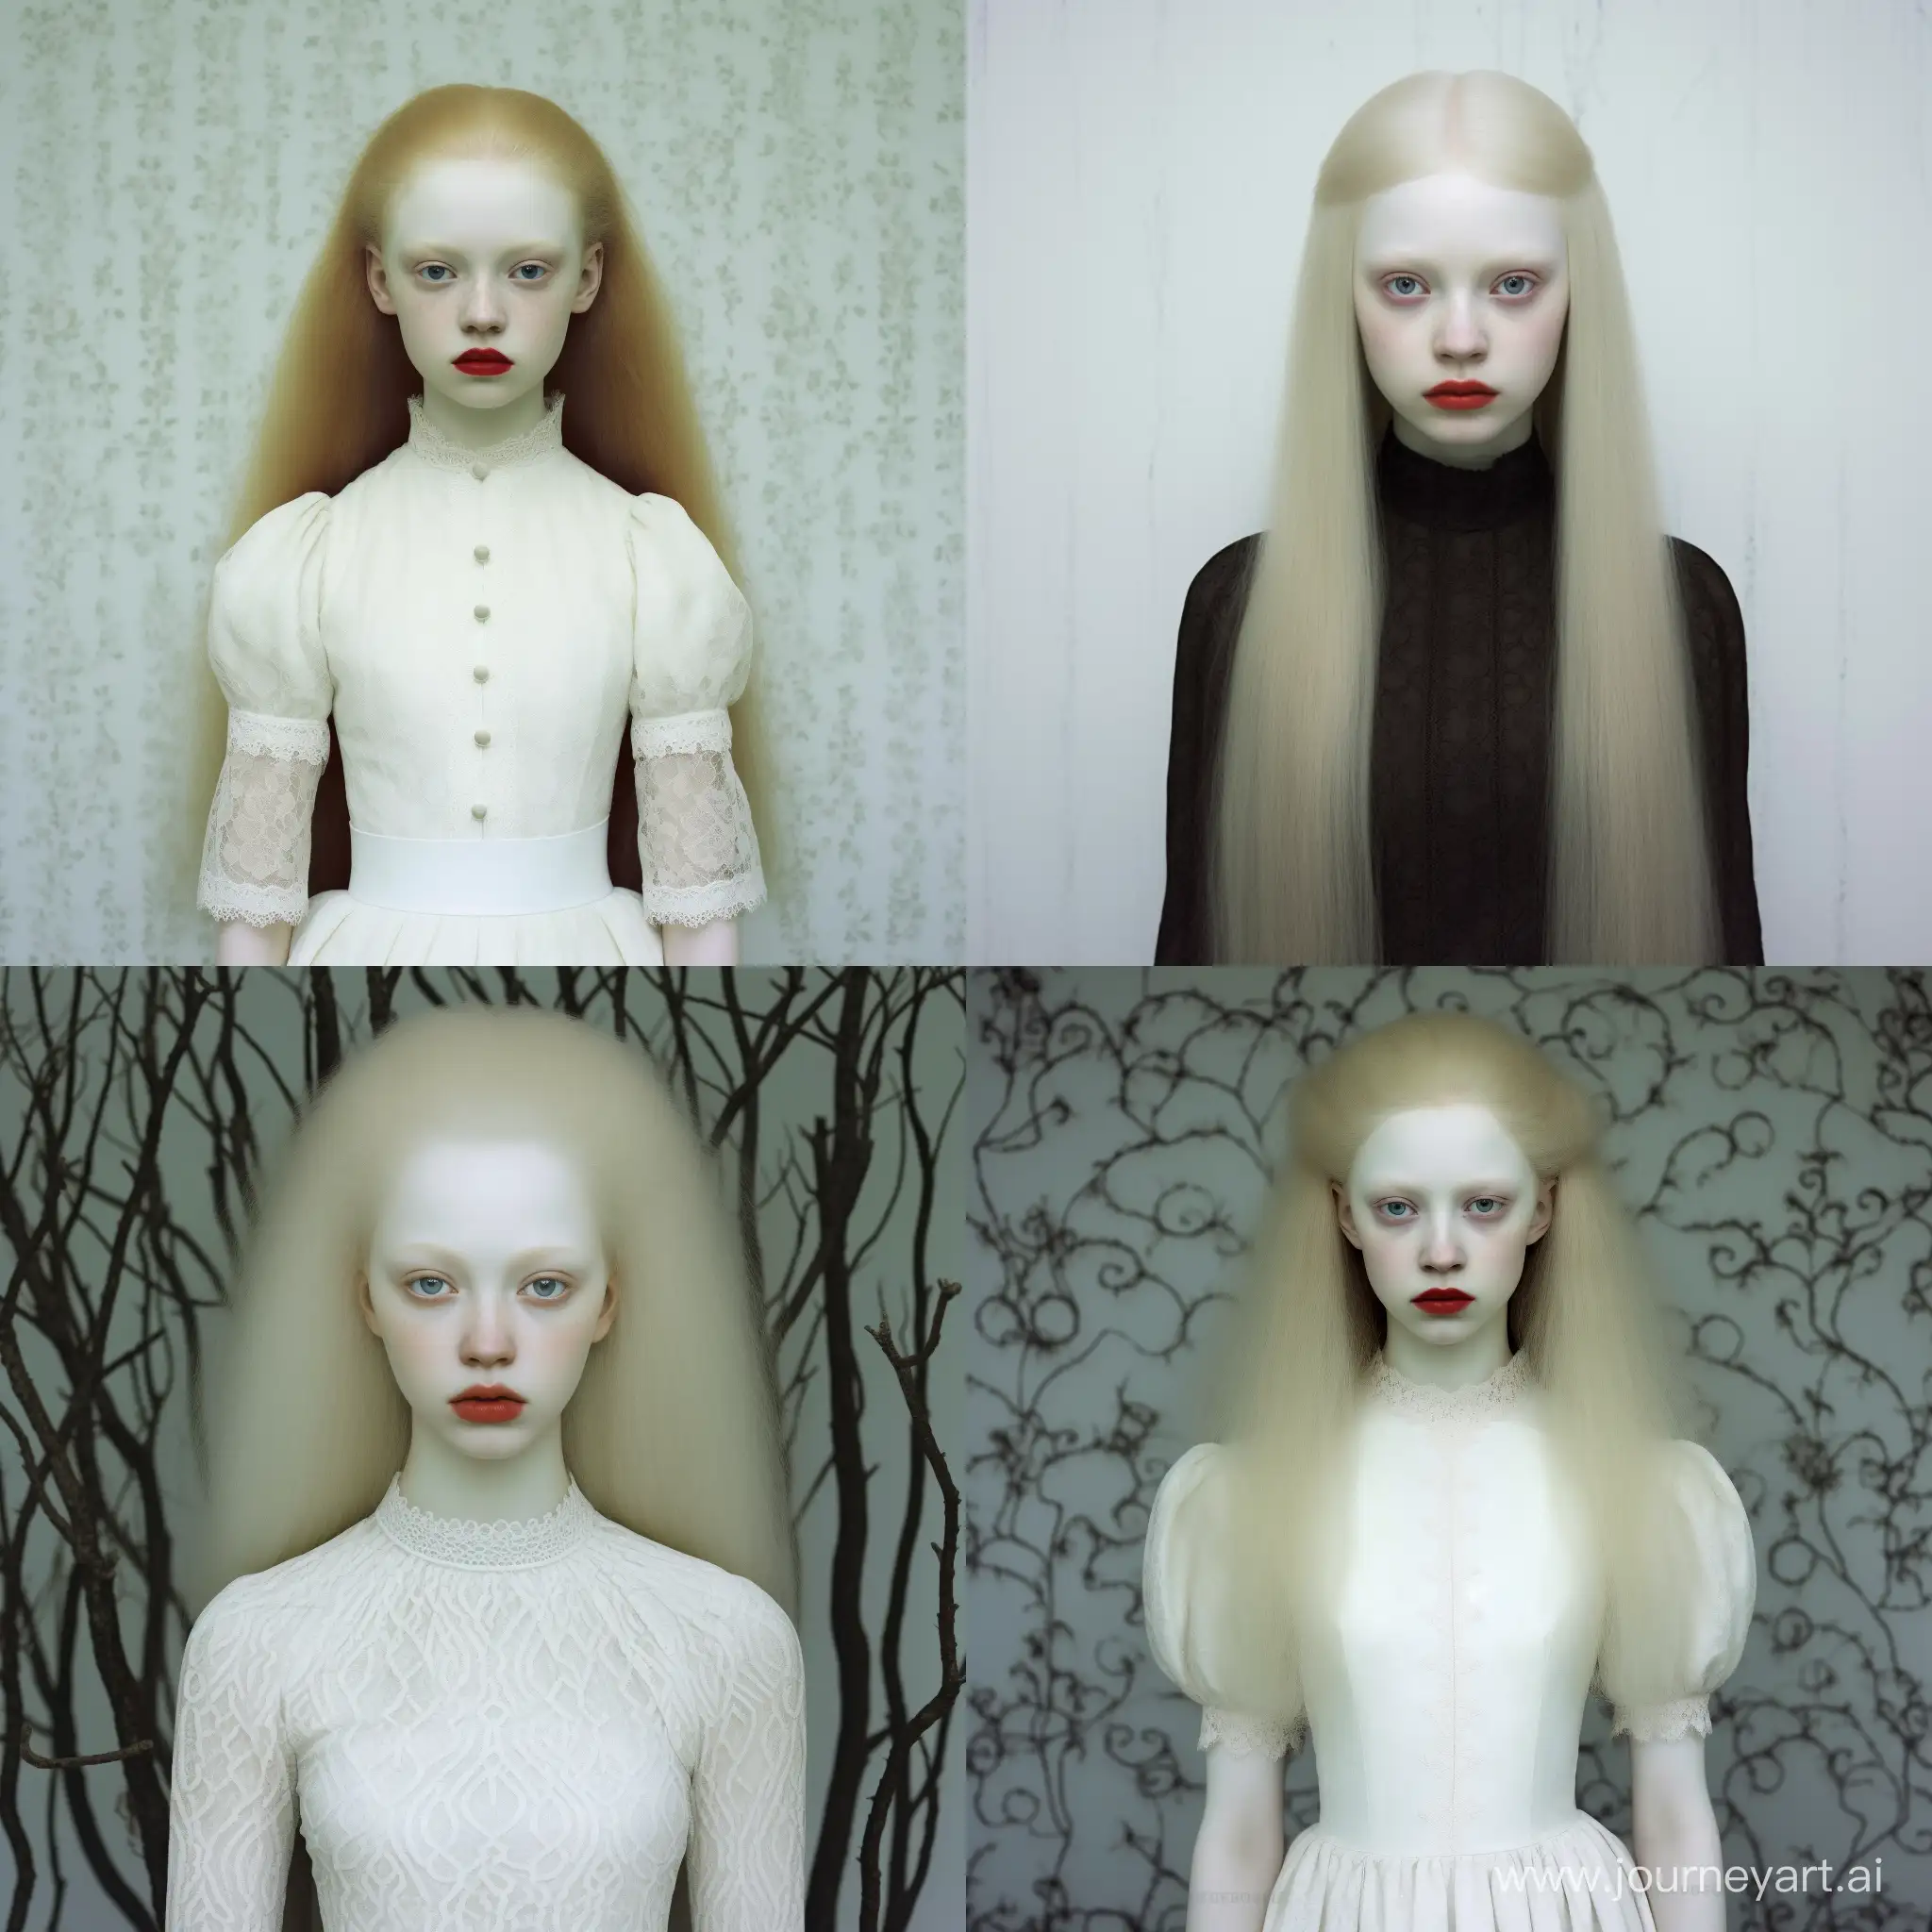 Captivating-Albino-Woman-20-Years-Old-Art-in-11-Aspect-Ratio